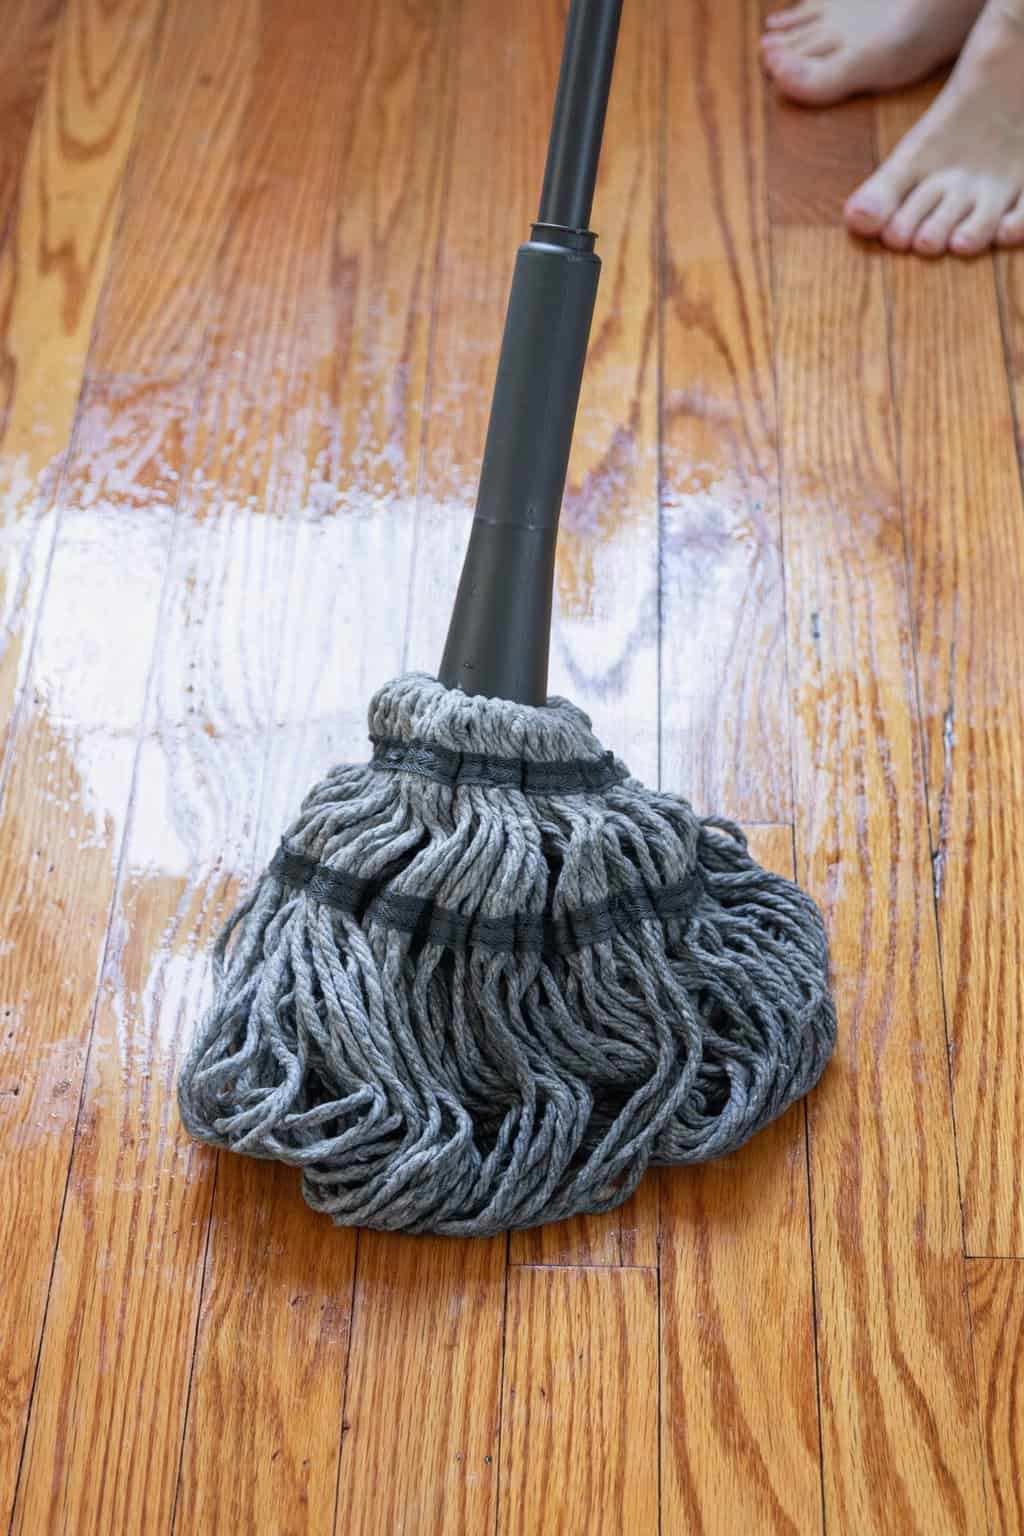 How to clean floors using homemade floor cleaners